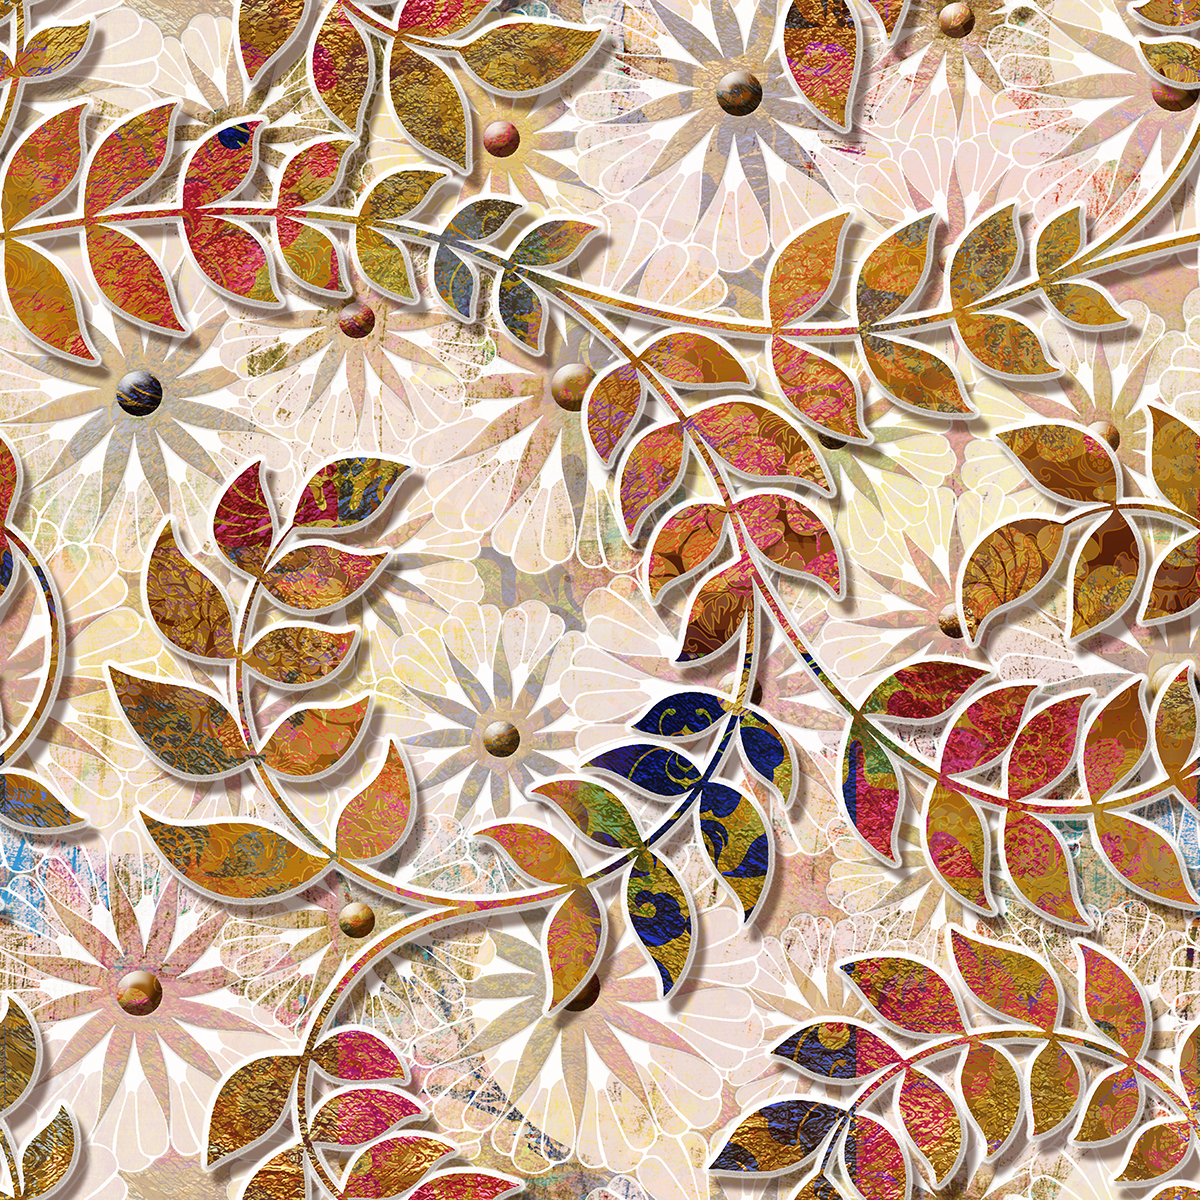 A colorful floral pattern with leaves